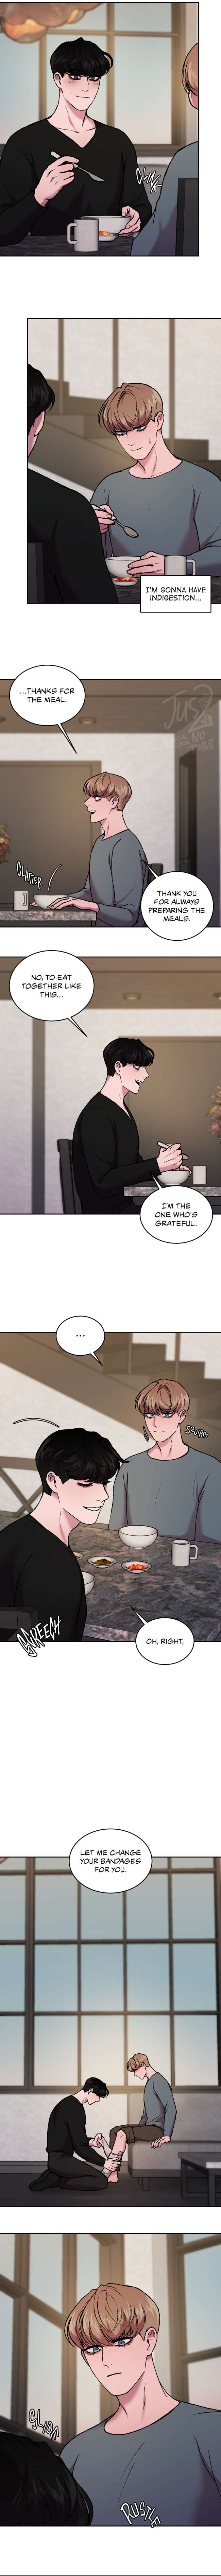 Hwanyoung's Misery - chapter 8 - #2